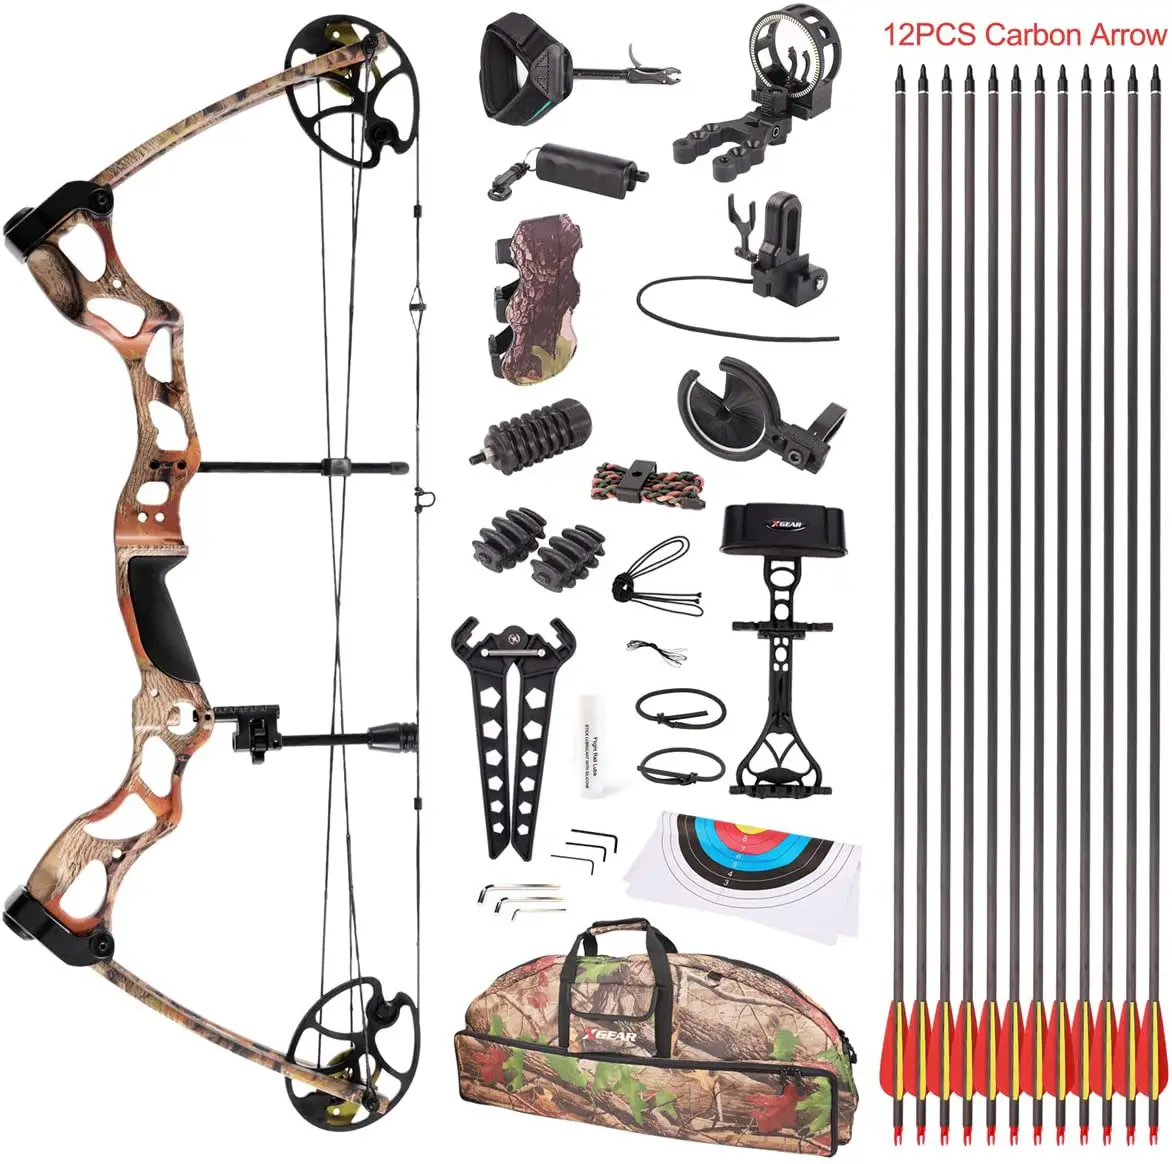 Leader Accessories Compound Hunting Bow review